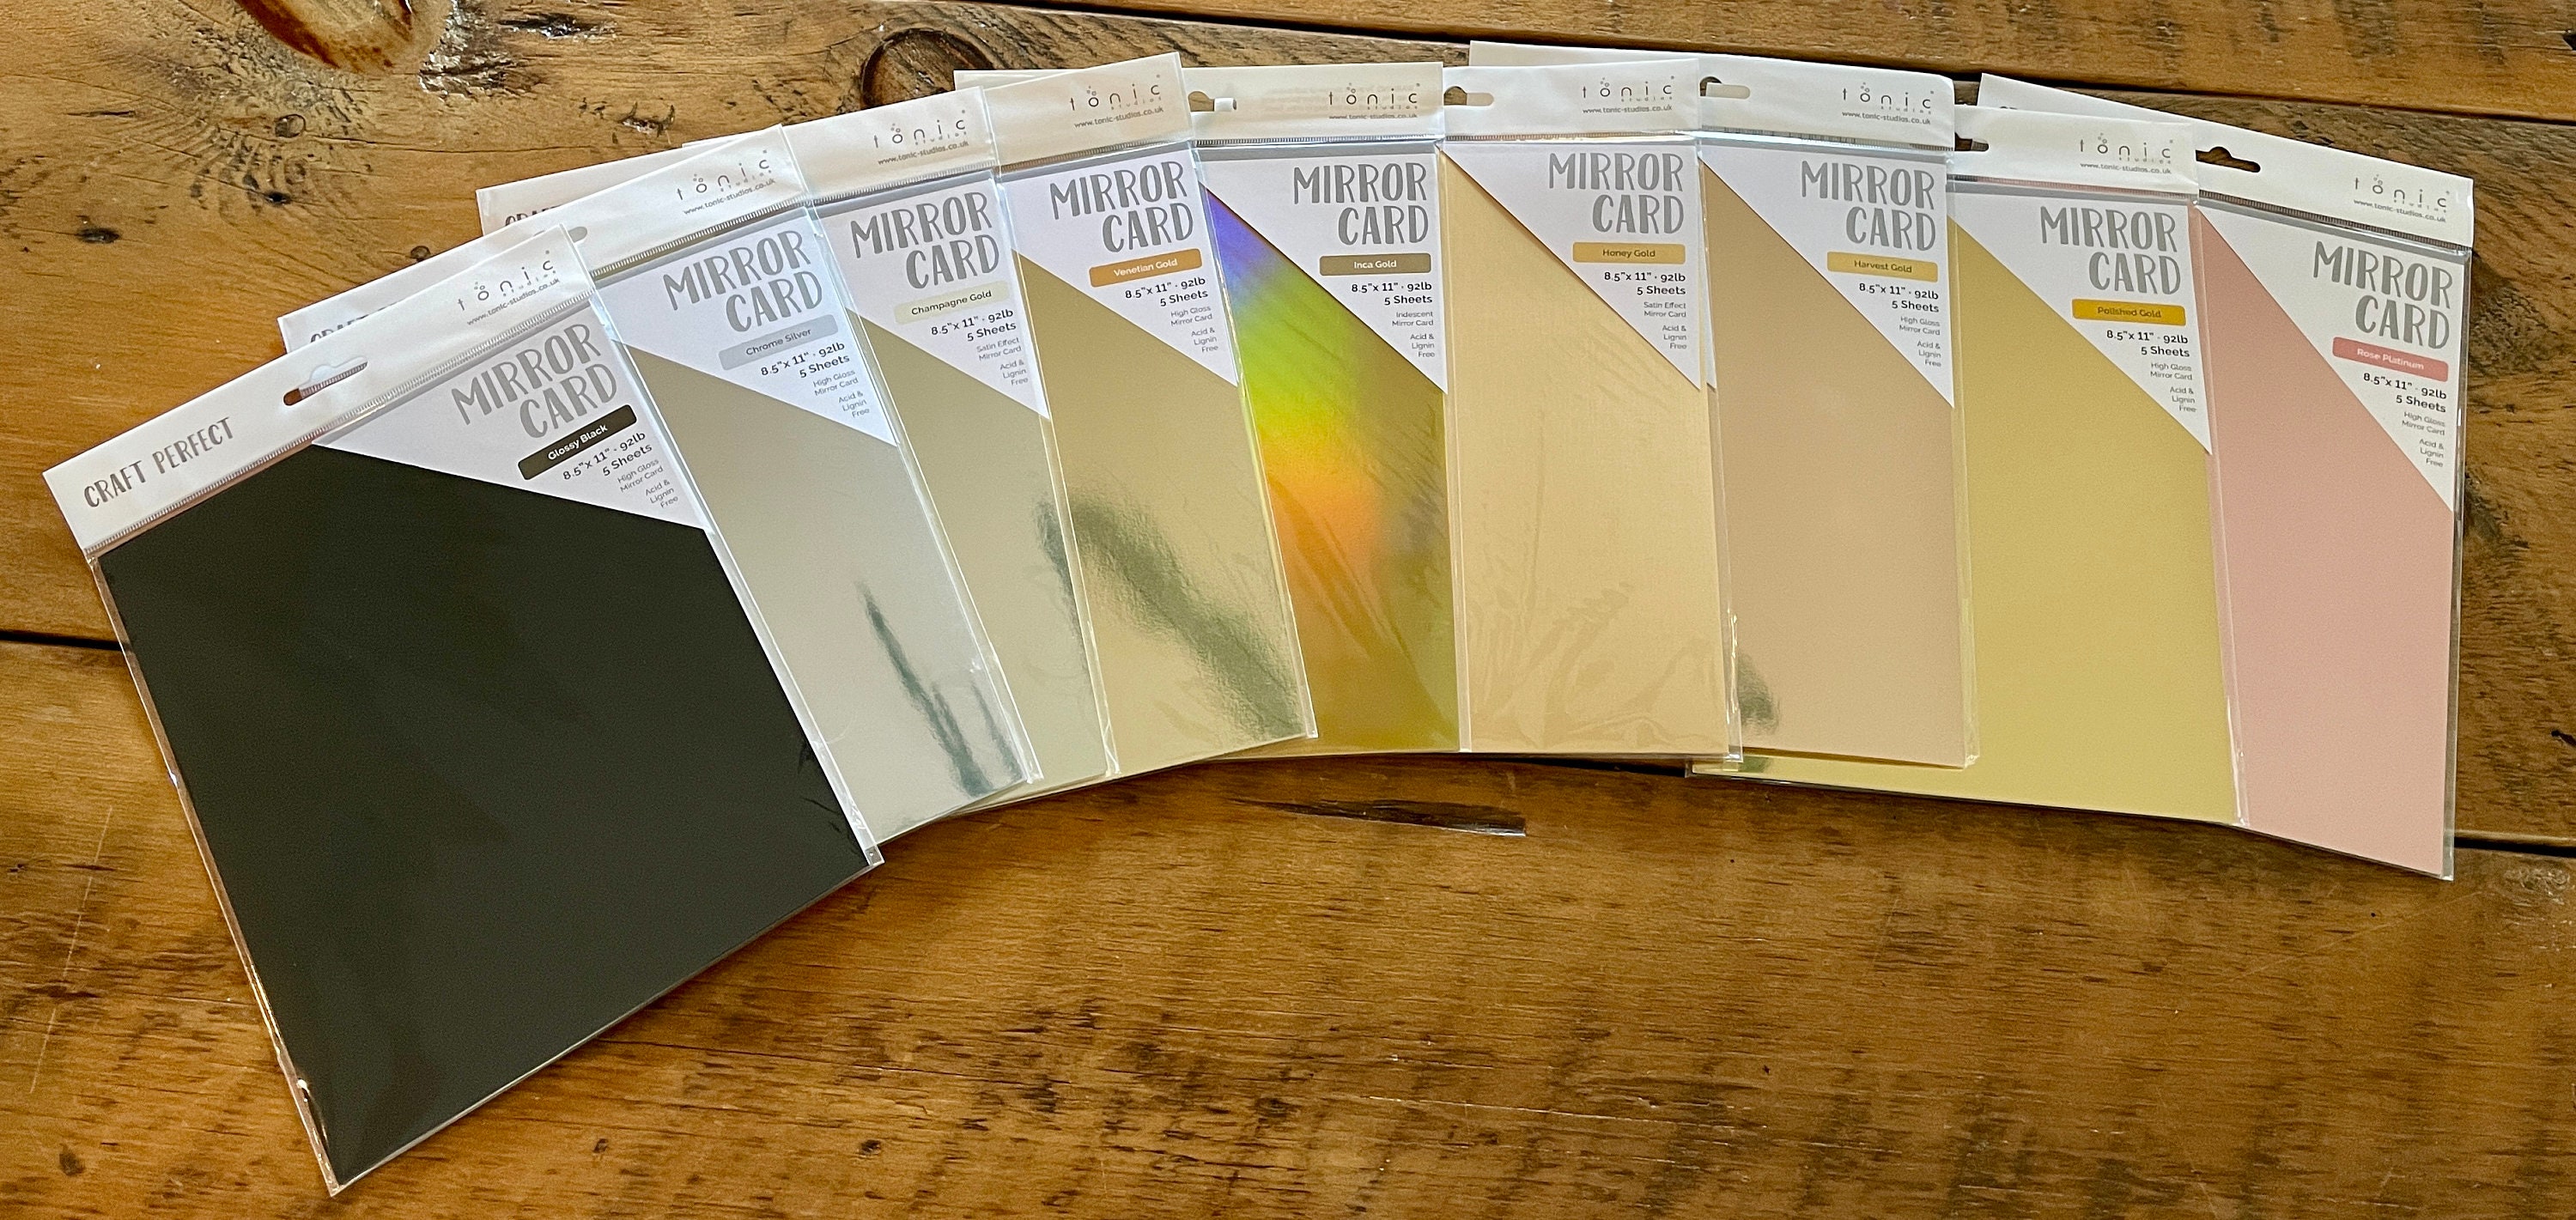 PAPERNOVA Real Silver Paper Colour Pearlescent Metallics Double Sided  Shimmer Paper 120gsm 250gsm A4 x 10 sheets A4 x 20 sheets HIGH QUALITY